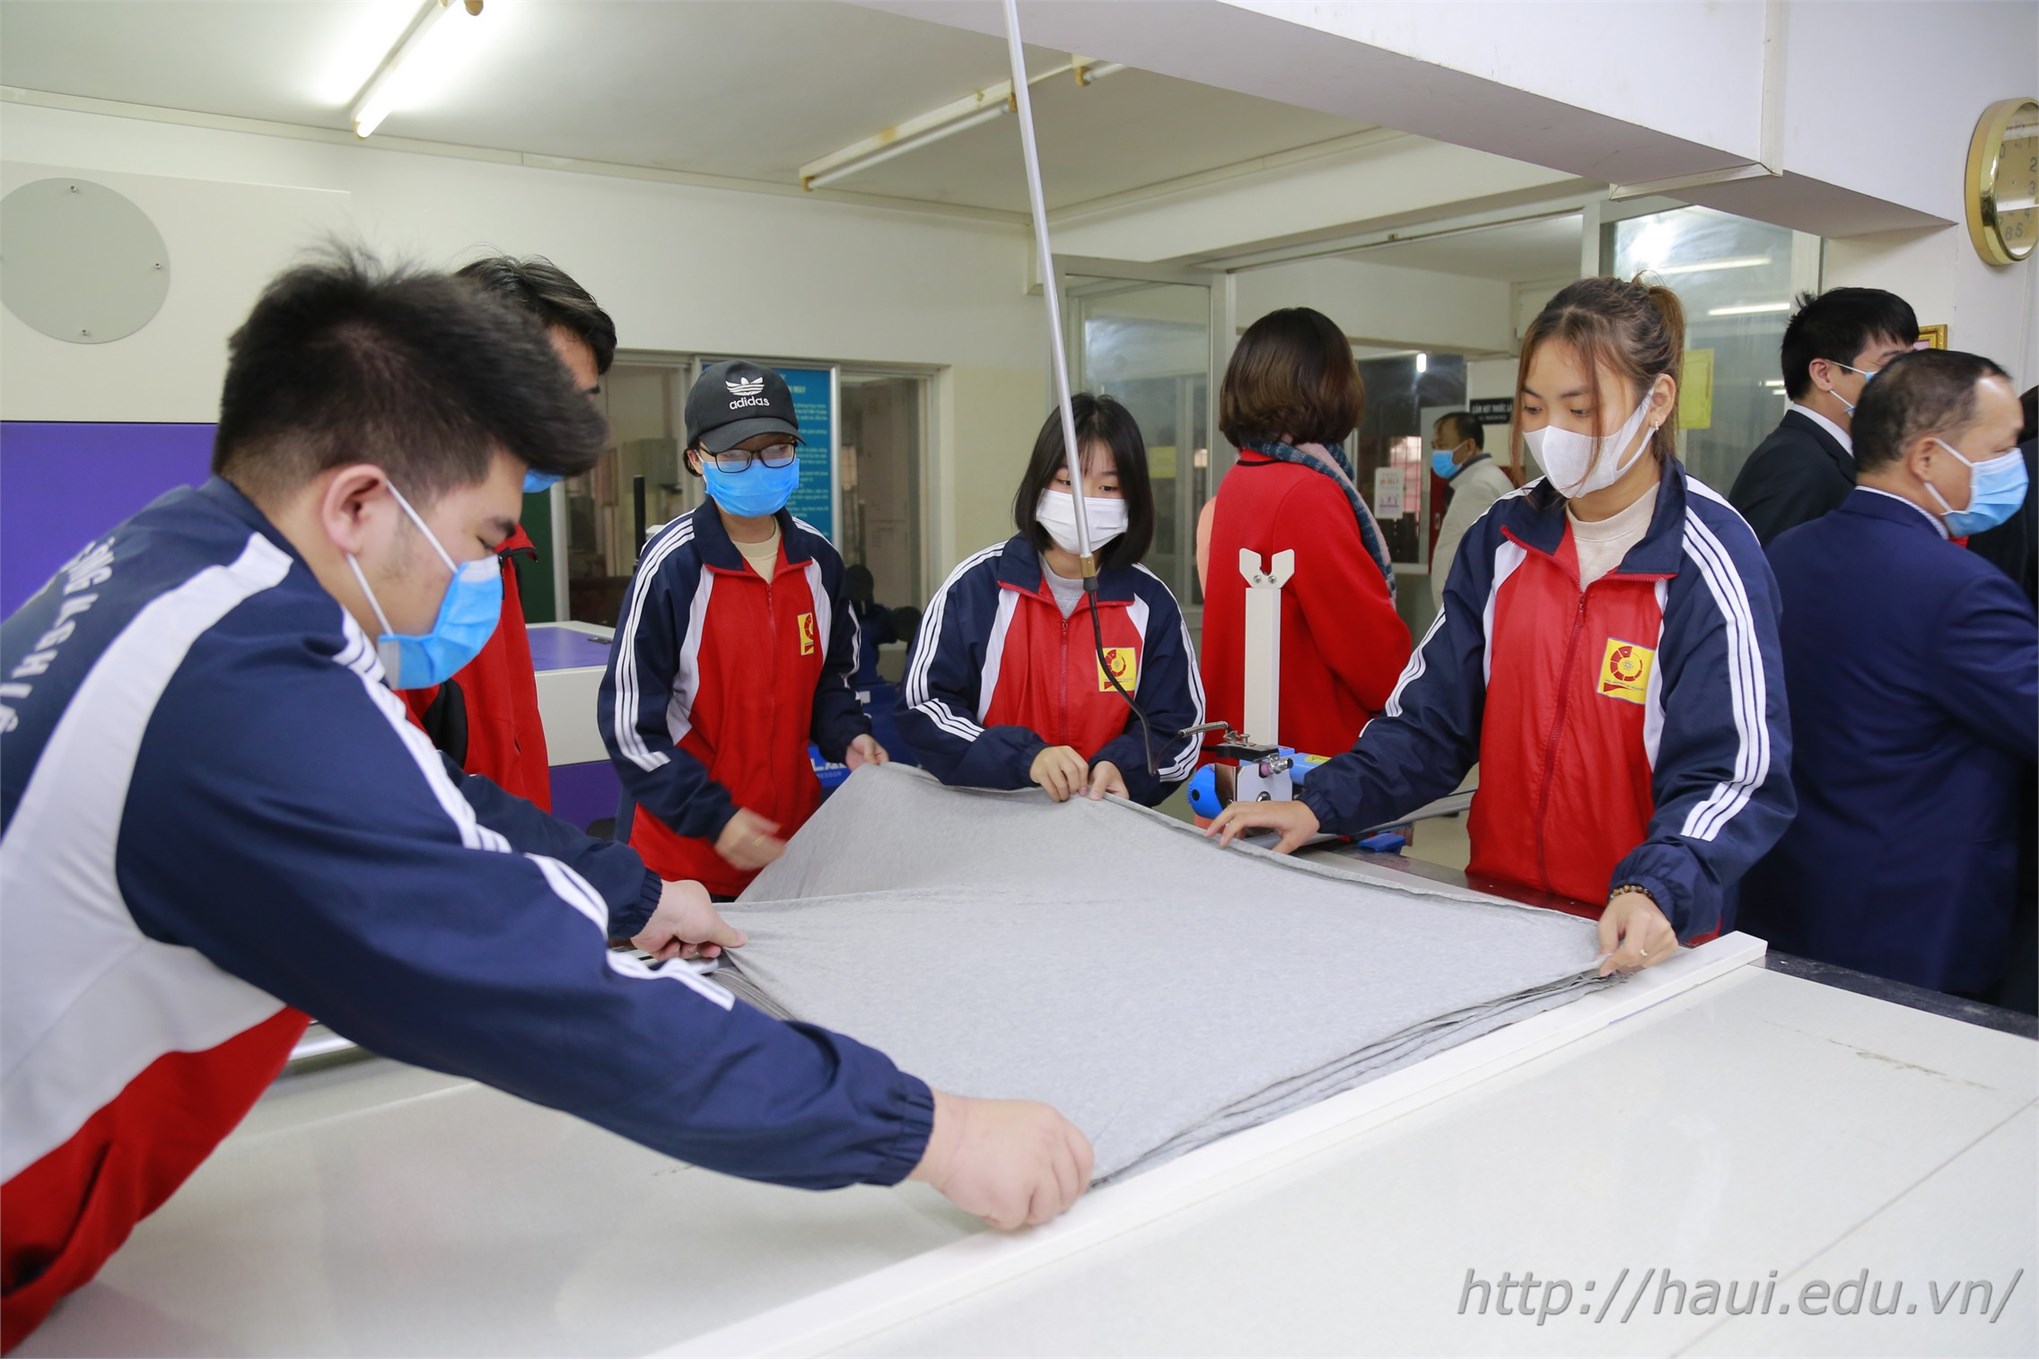 30,000 masks are produced and distributed free of charge to HaUI staffs and students